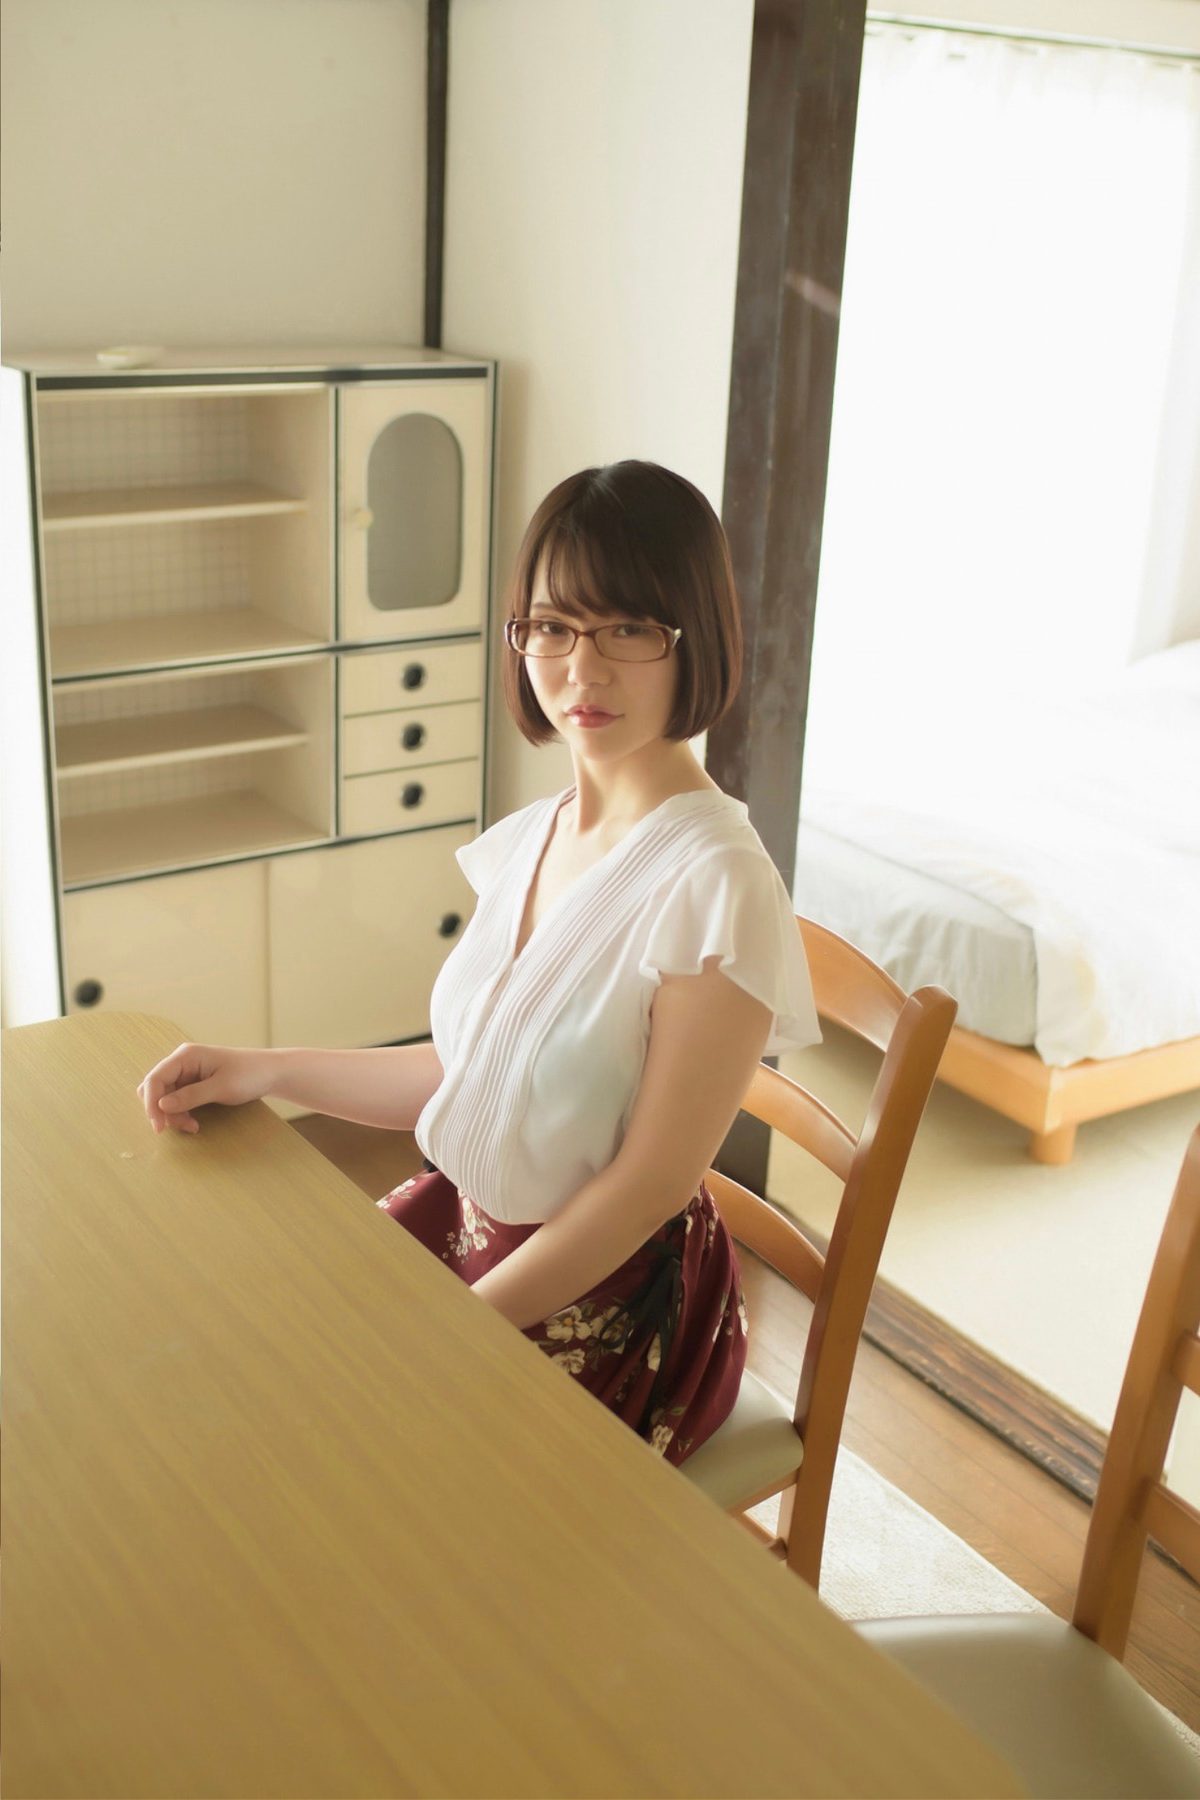 Gravure Photo Book Nenne 初愛ねんね Eye Difference 0024 4131443160.jpg